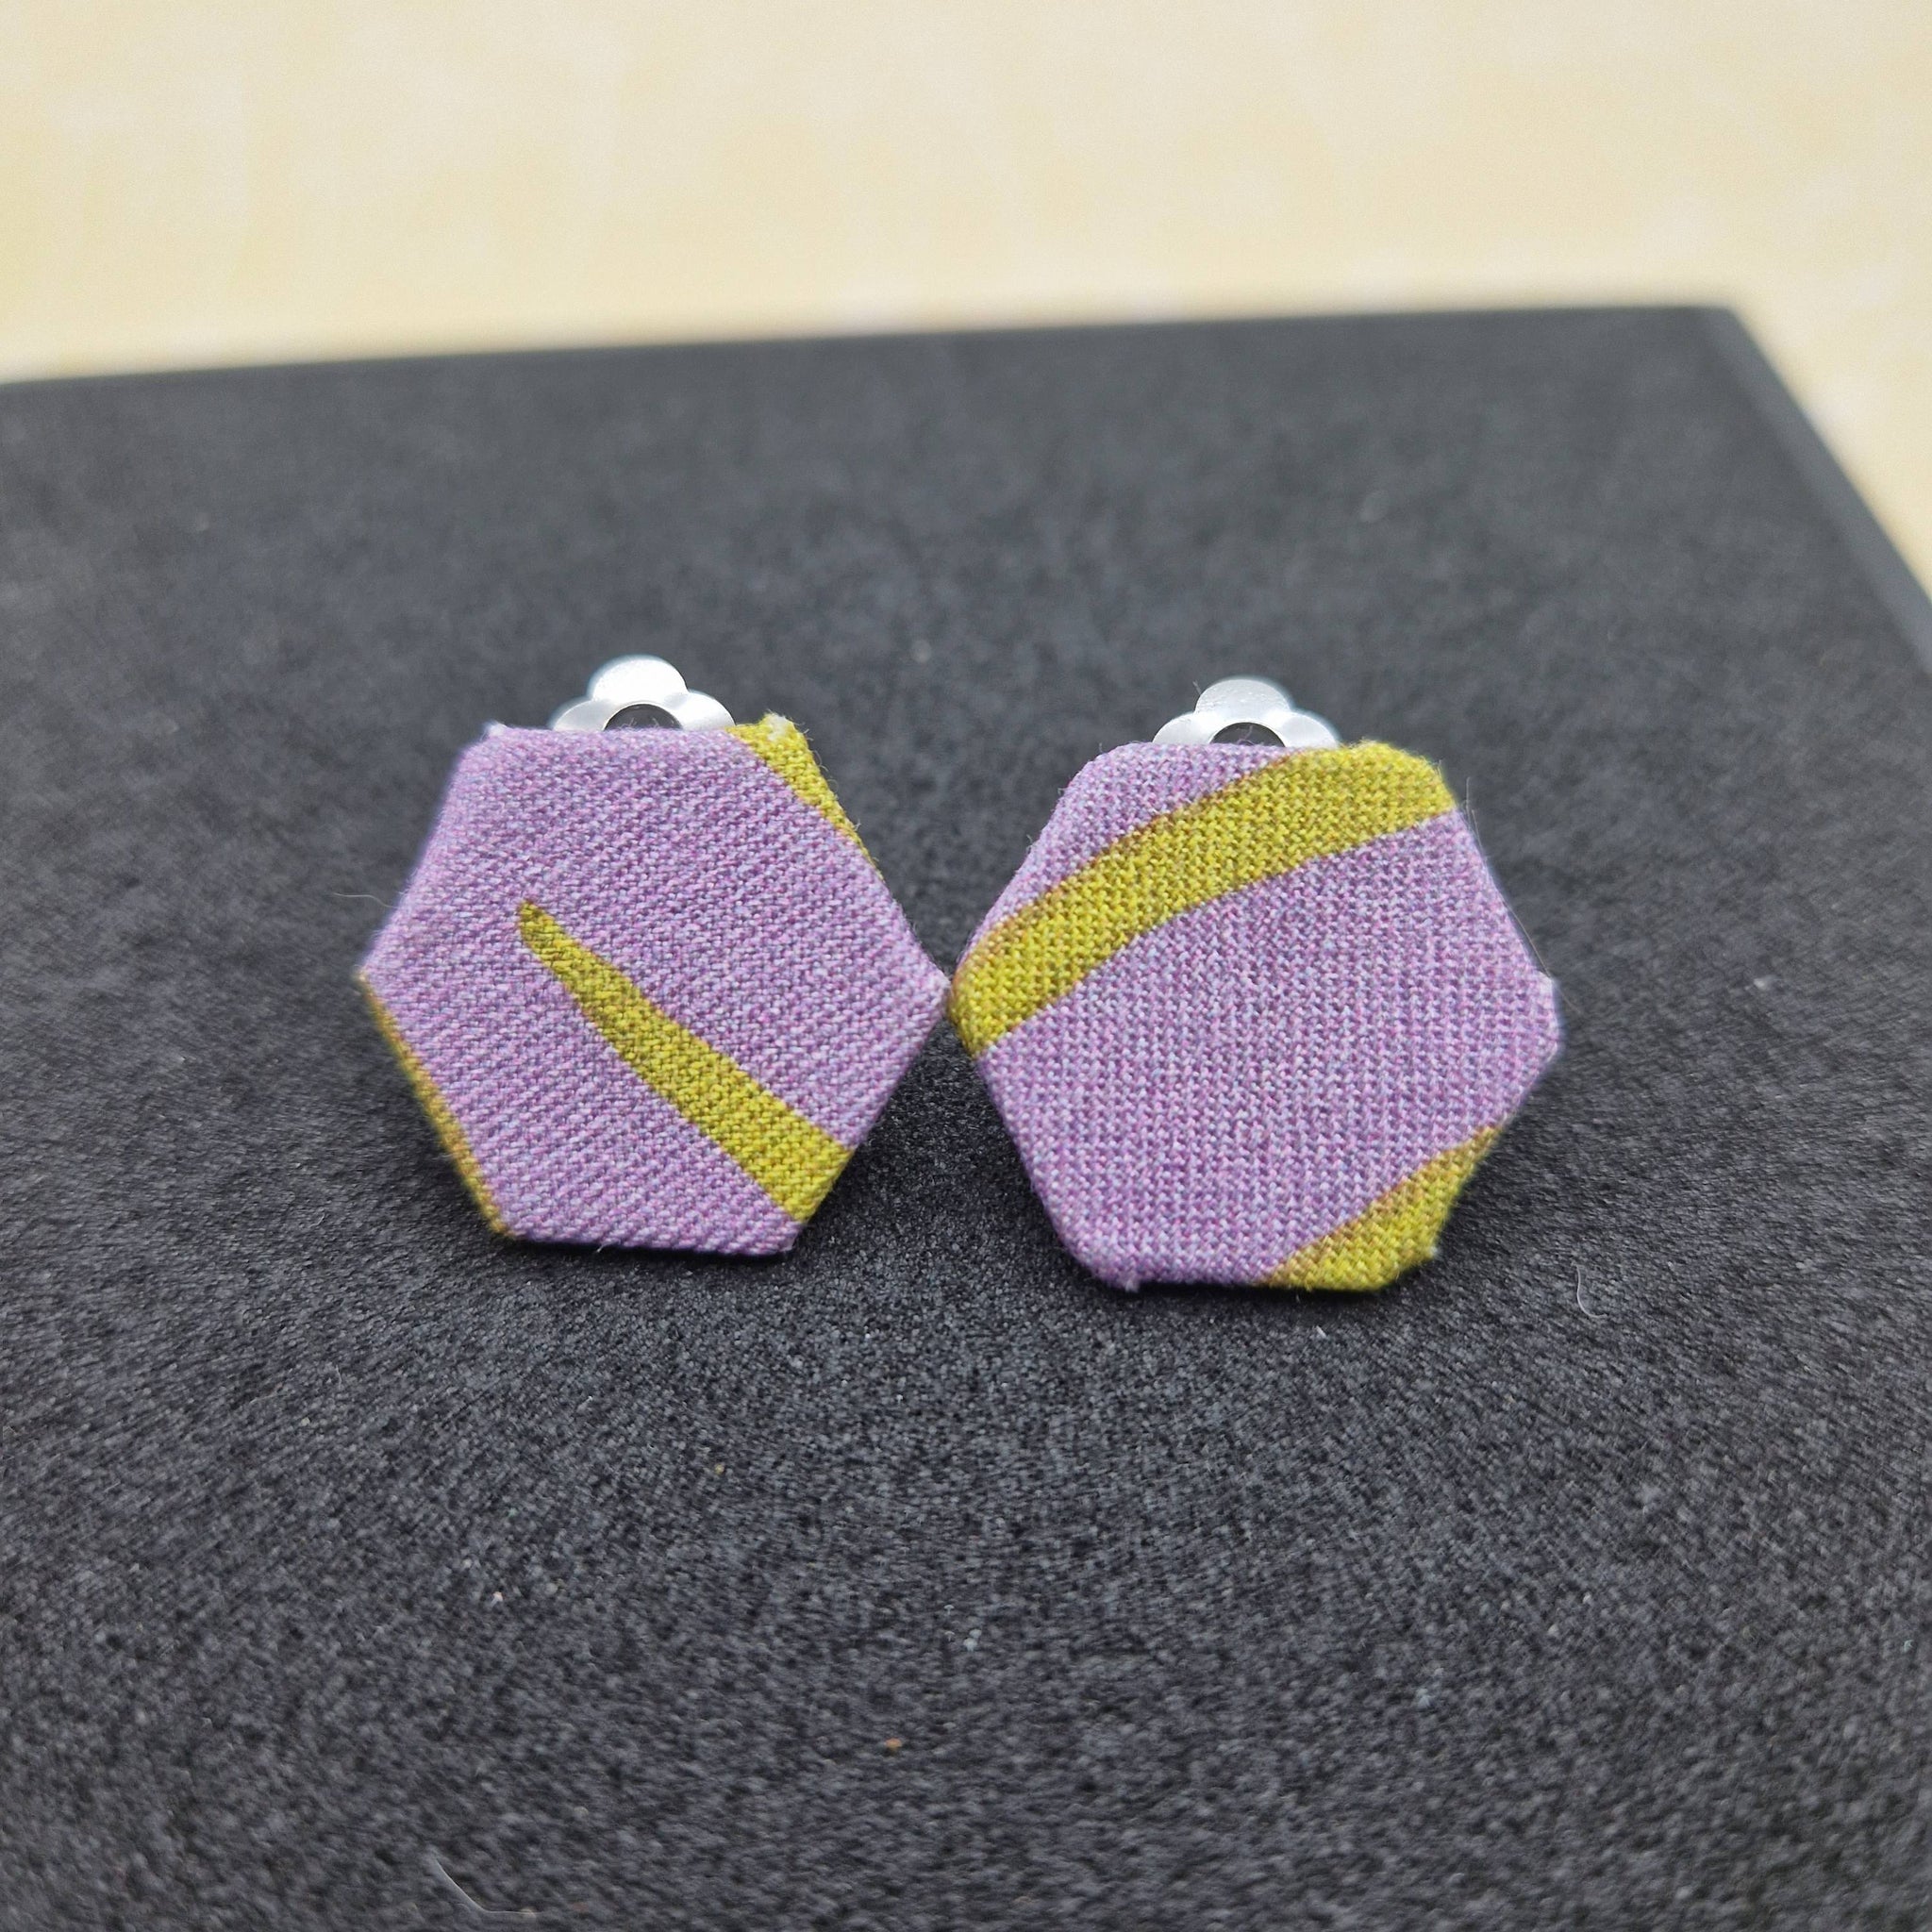 Purple and yellow clip on earrings